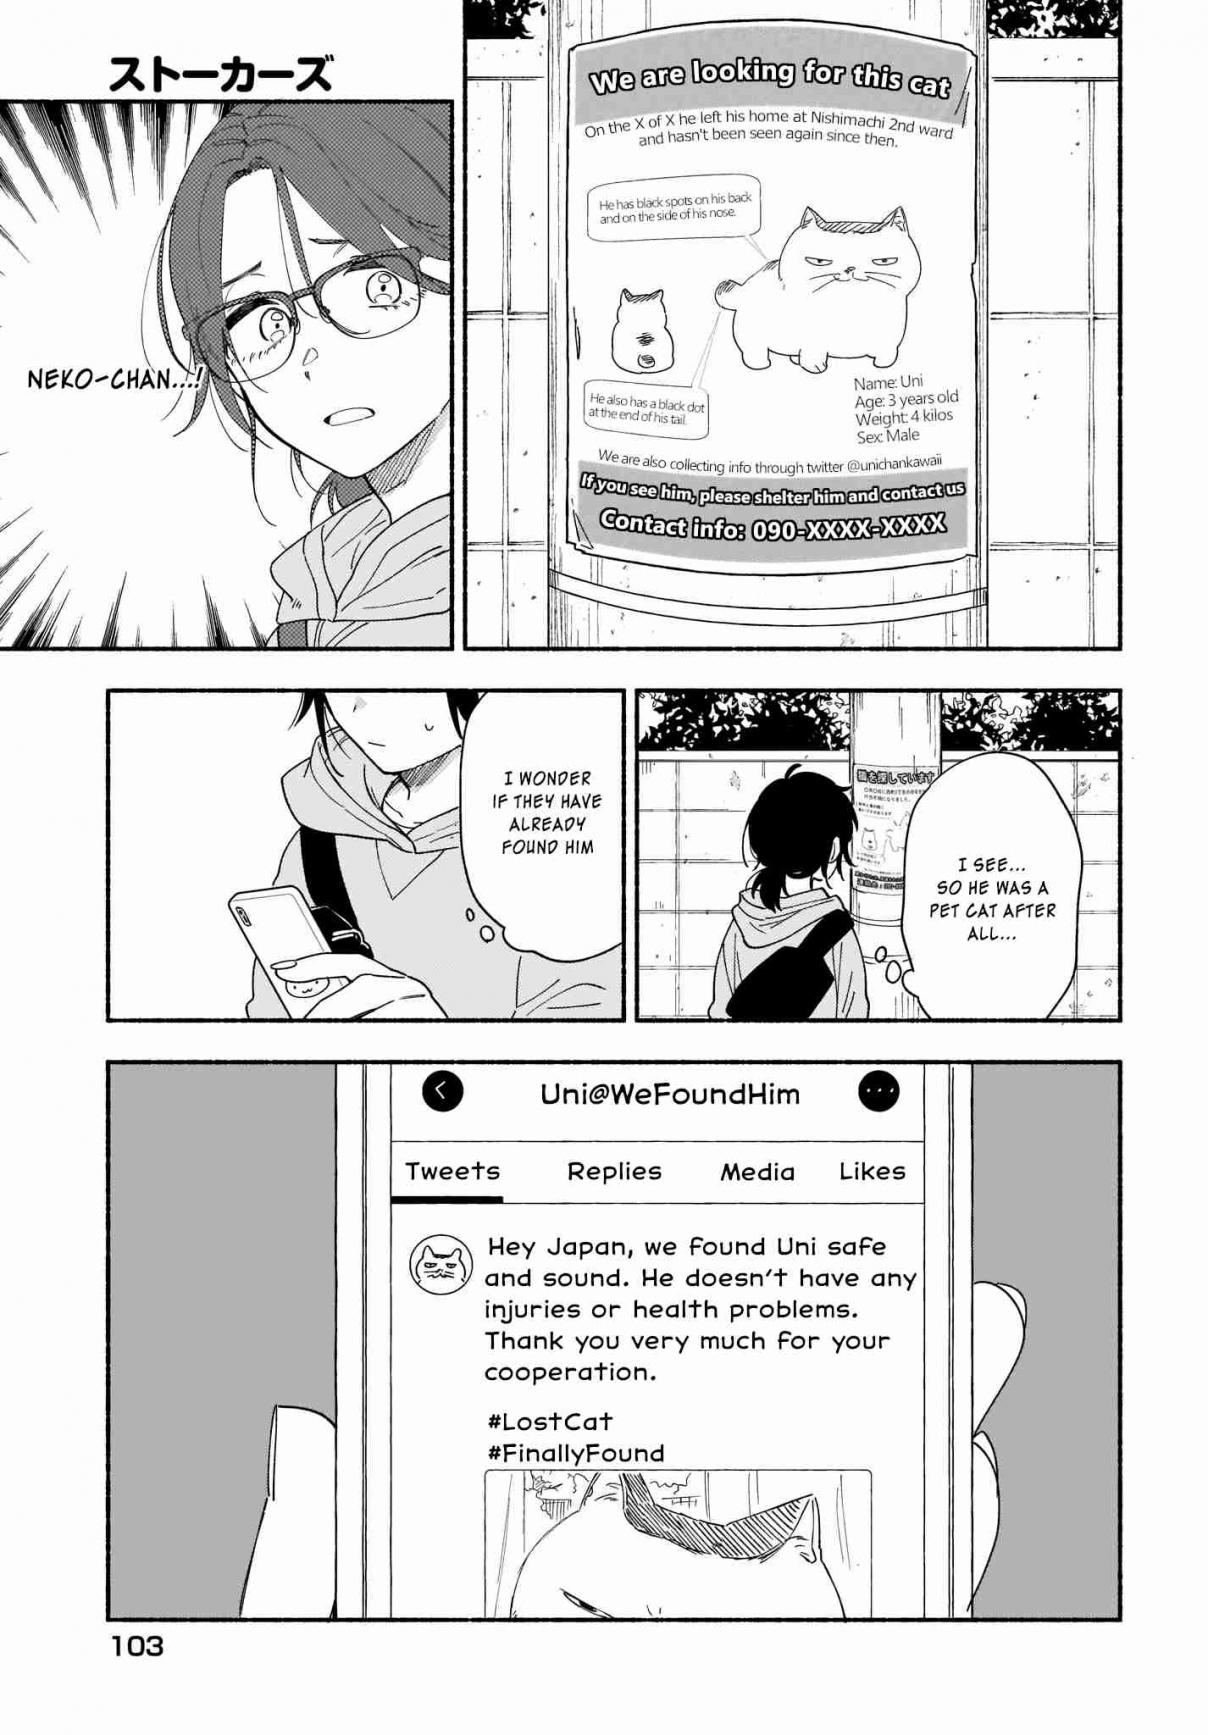 Stalkers Vol. 3 Ch. 20 I want to pamper you